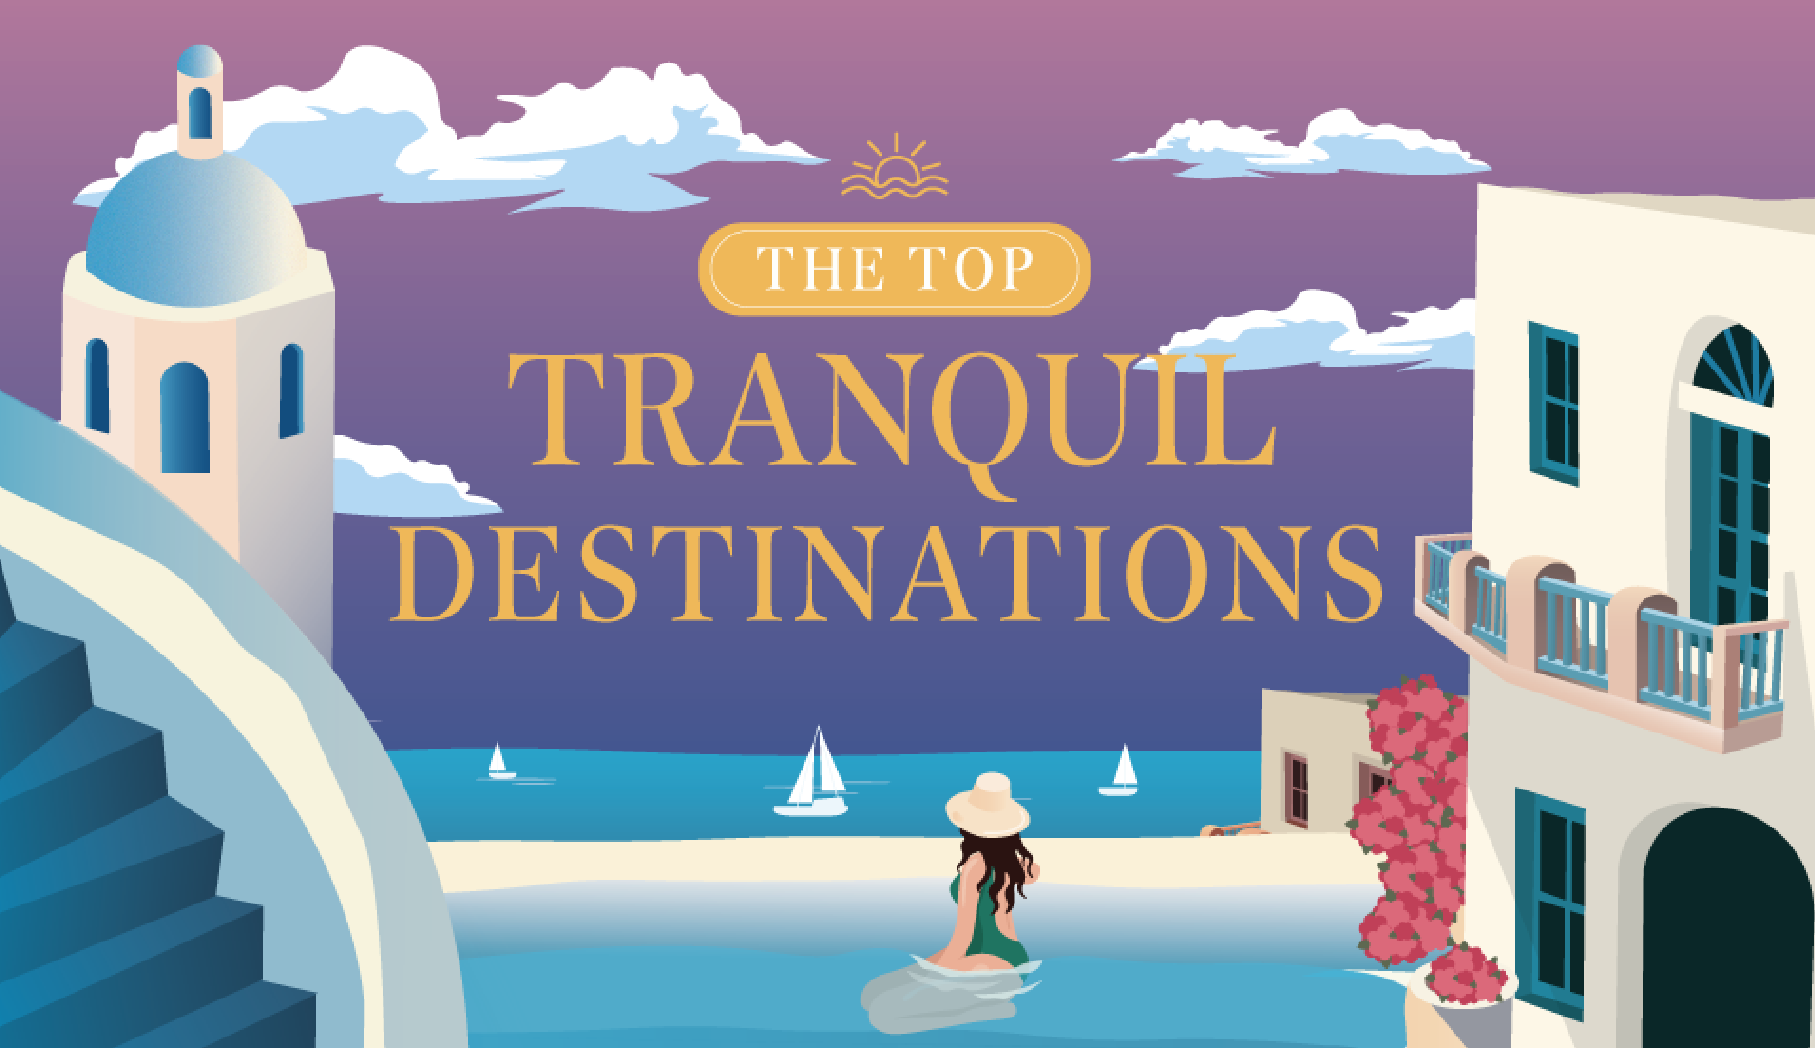 The top tranquil destinations